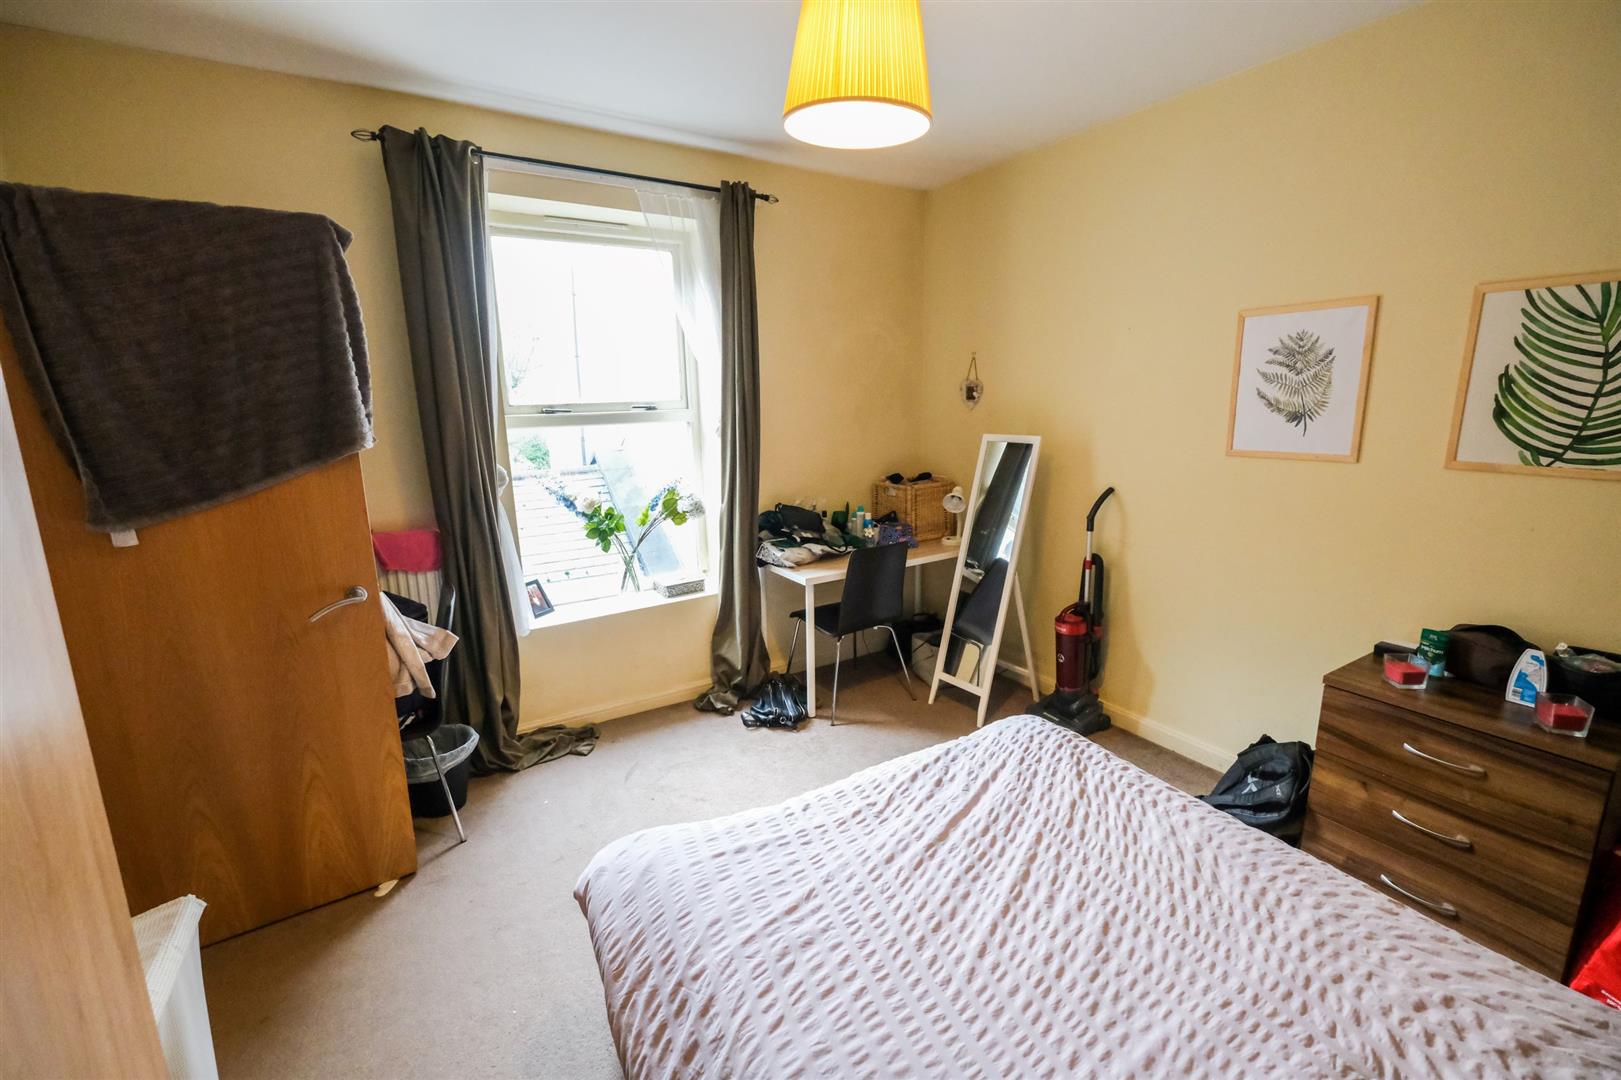 1 bedroom furnished flat in London SW1P 4SB RoomsLocal image